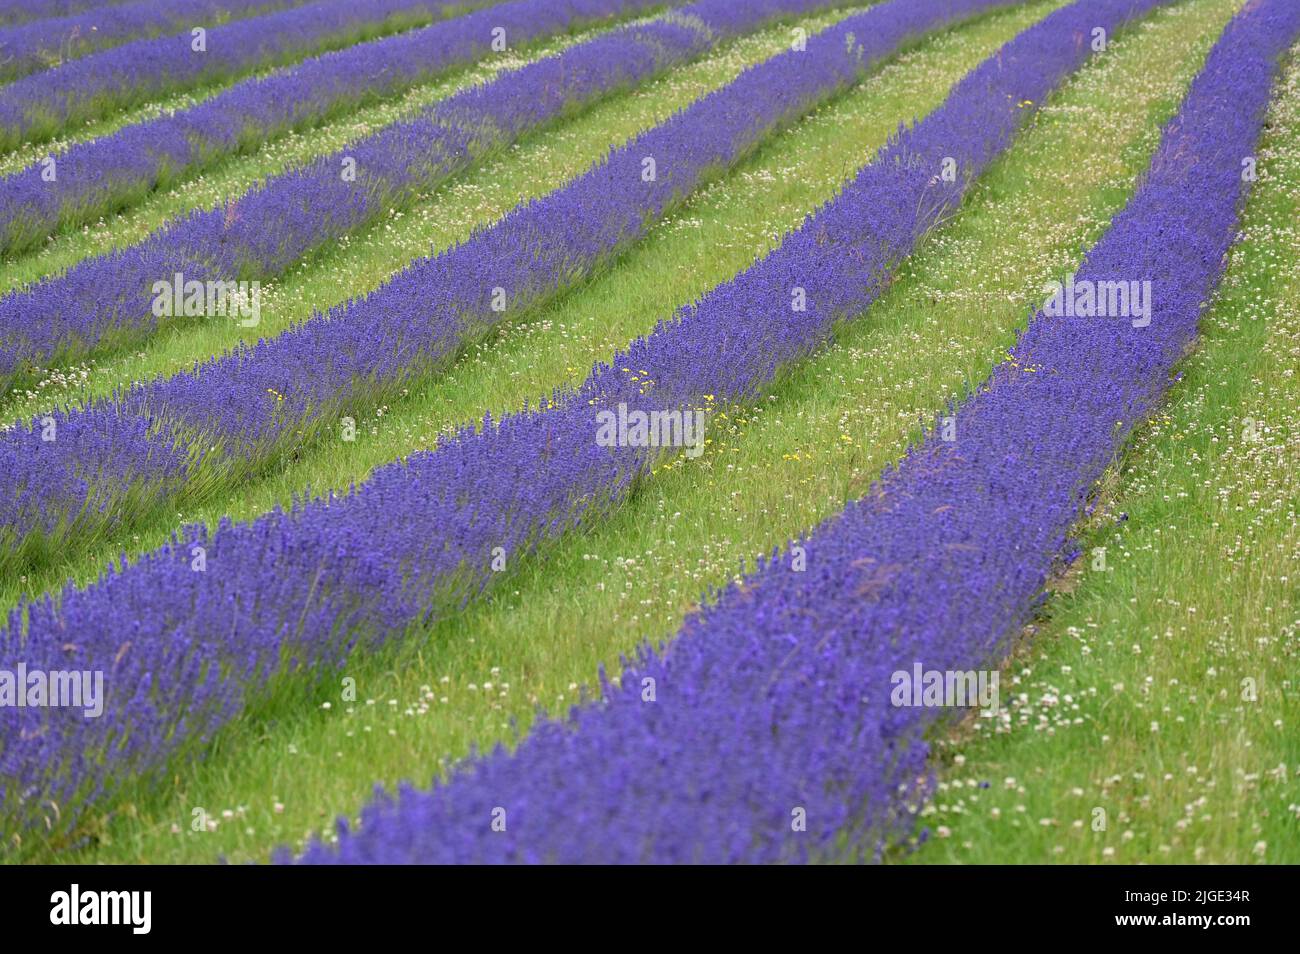 Rows of lavender in flower at Cotswold Lavender, Snowshill, Gloucestershire Stock Photo